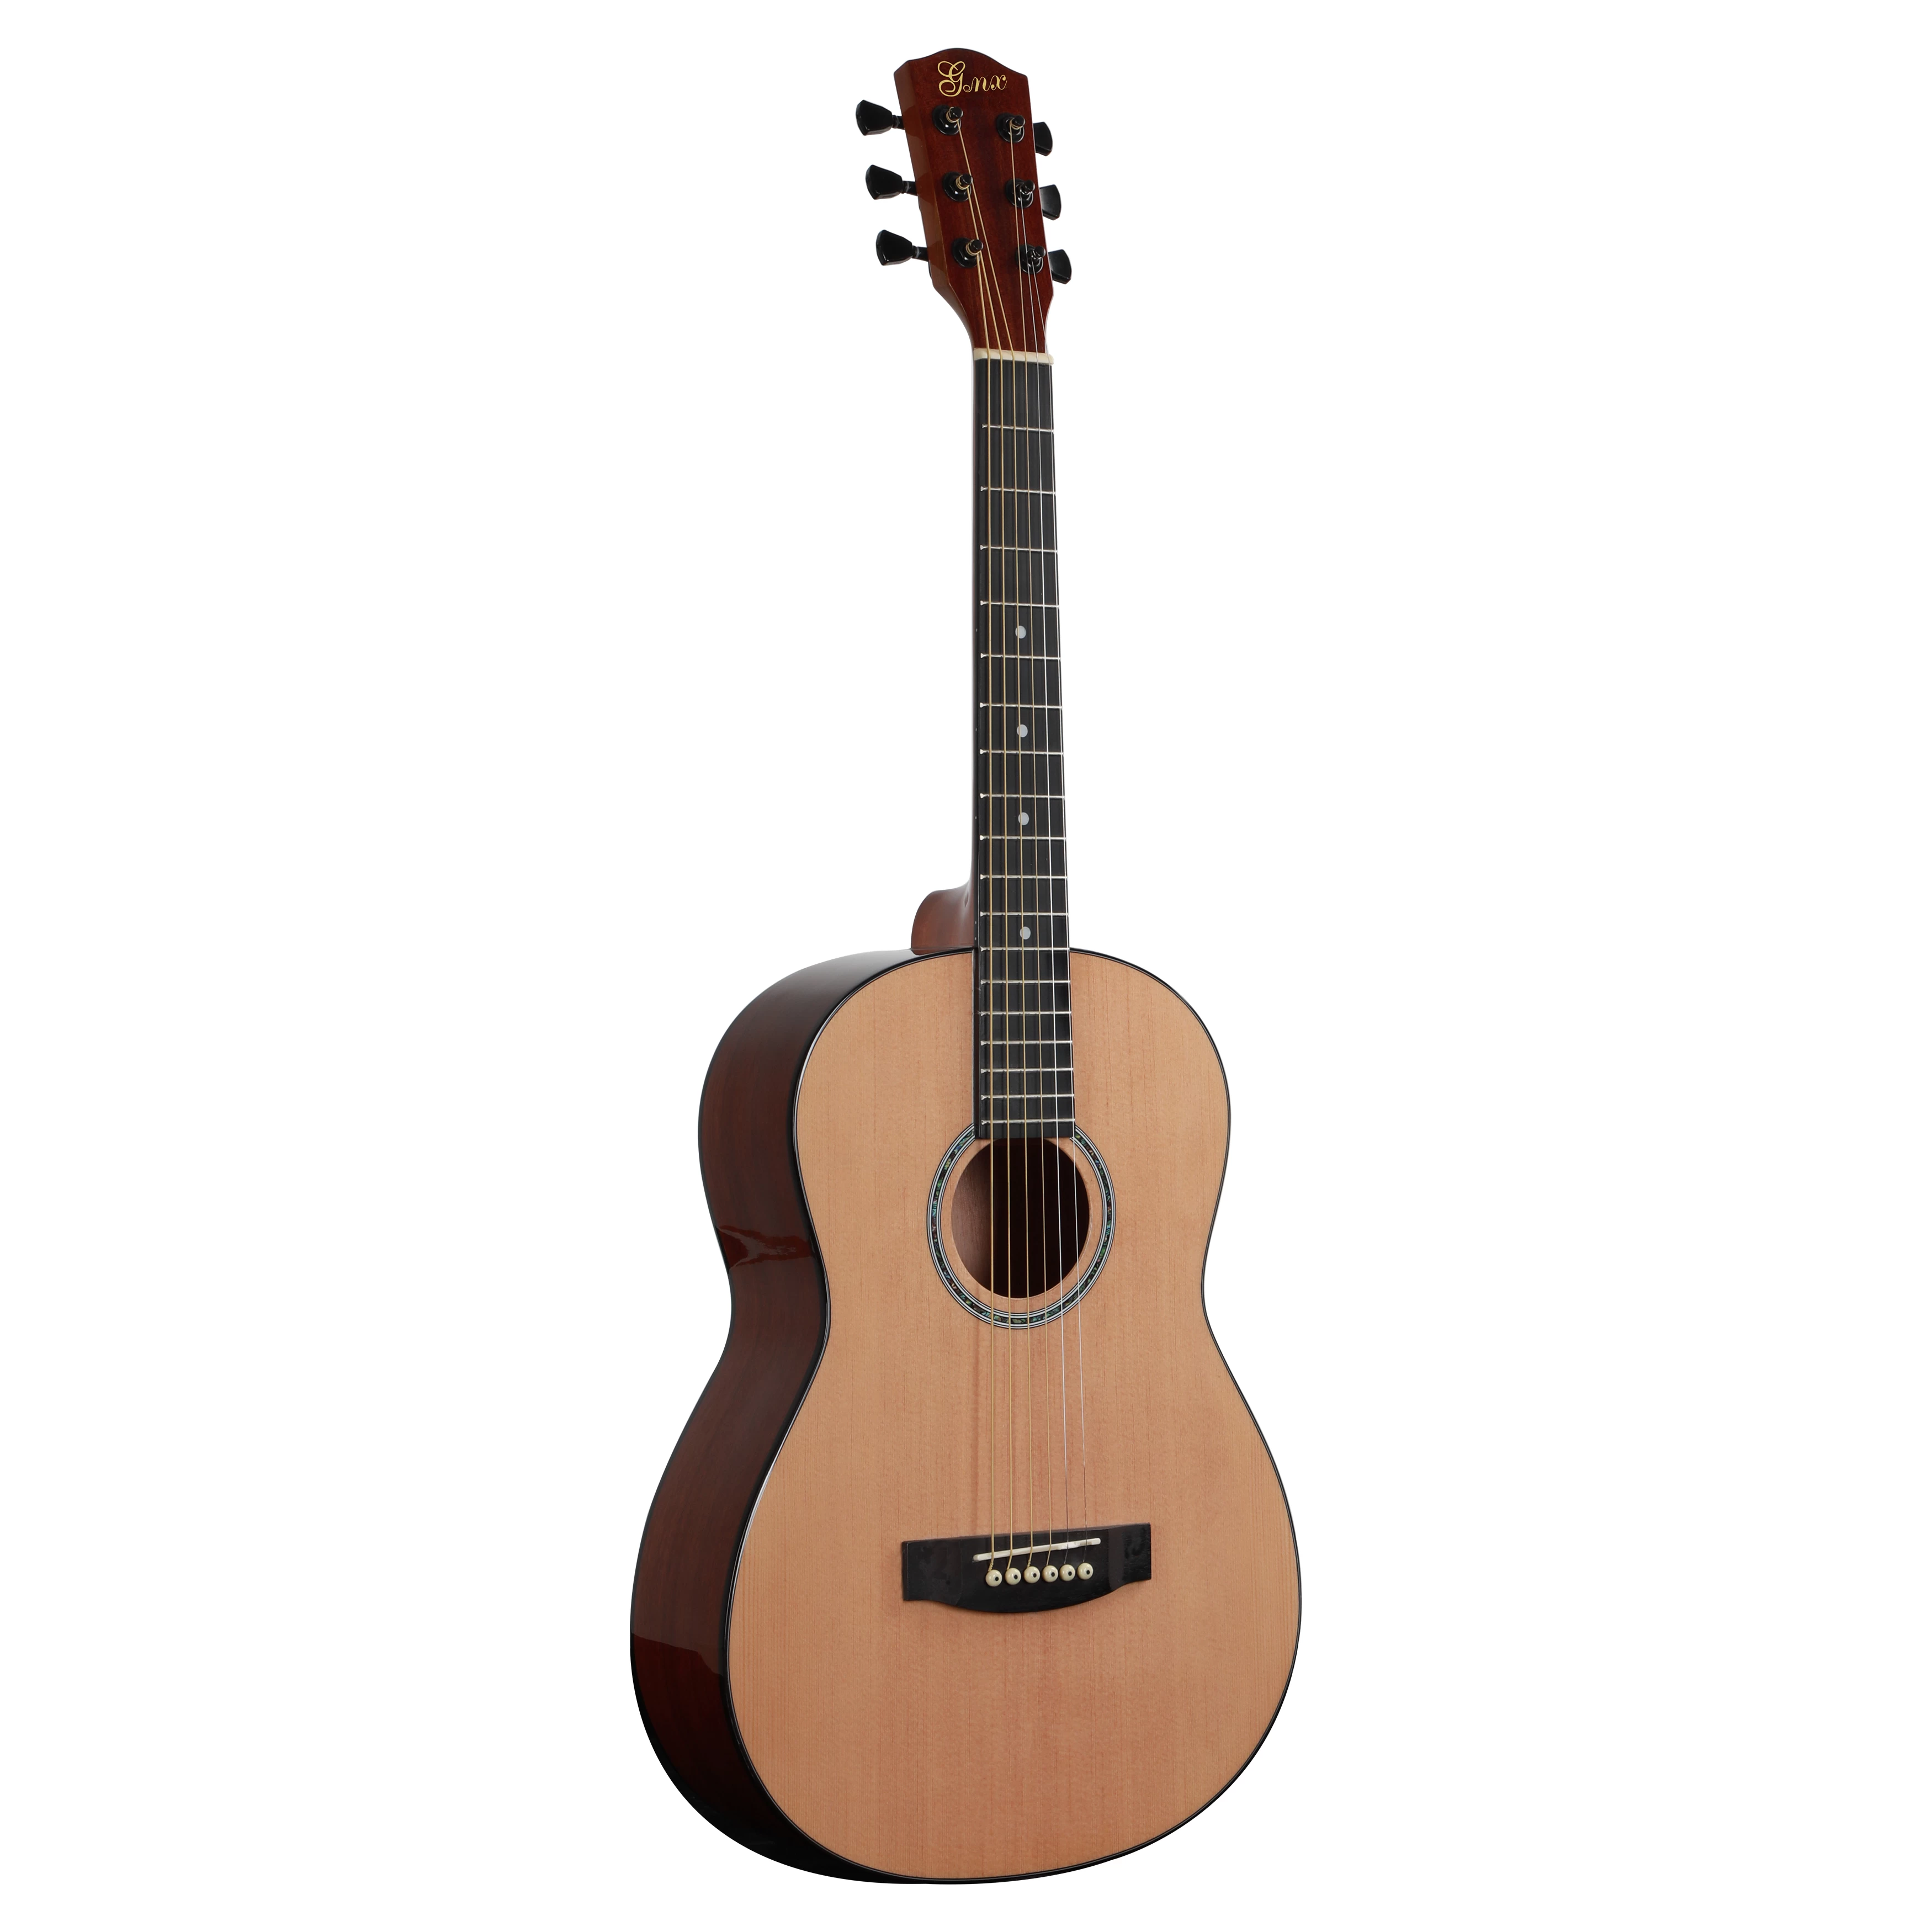 Classic Body/German Body/36 inch Spruce Top with Sapele Back&Side acoustic guitar